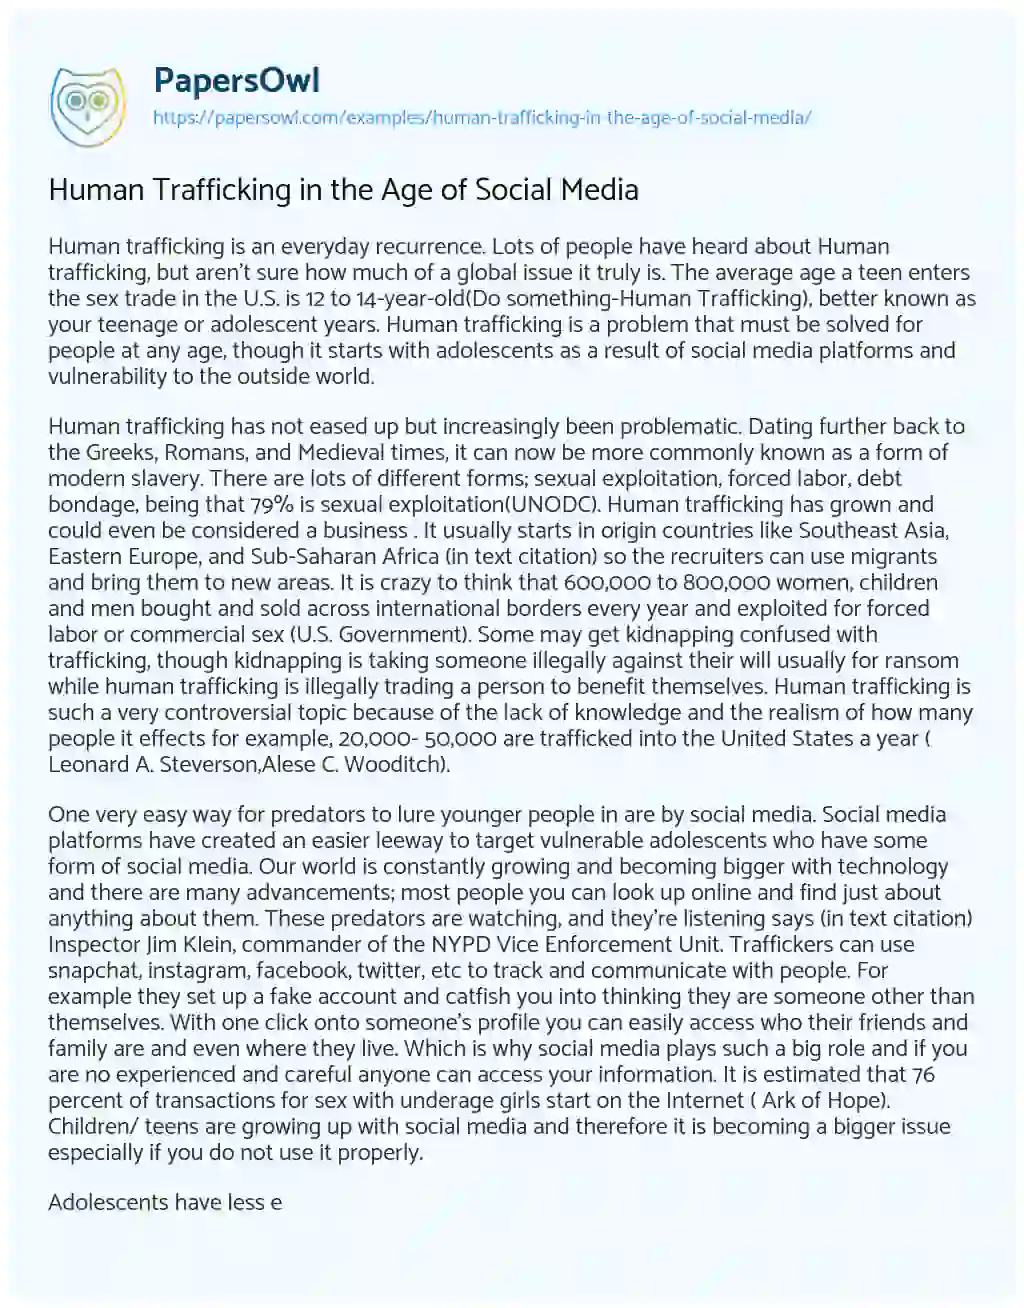 Essay on Human Trafficking in the Age of Social Media